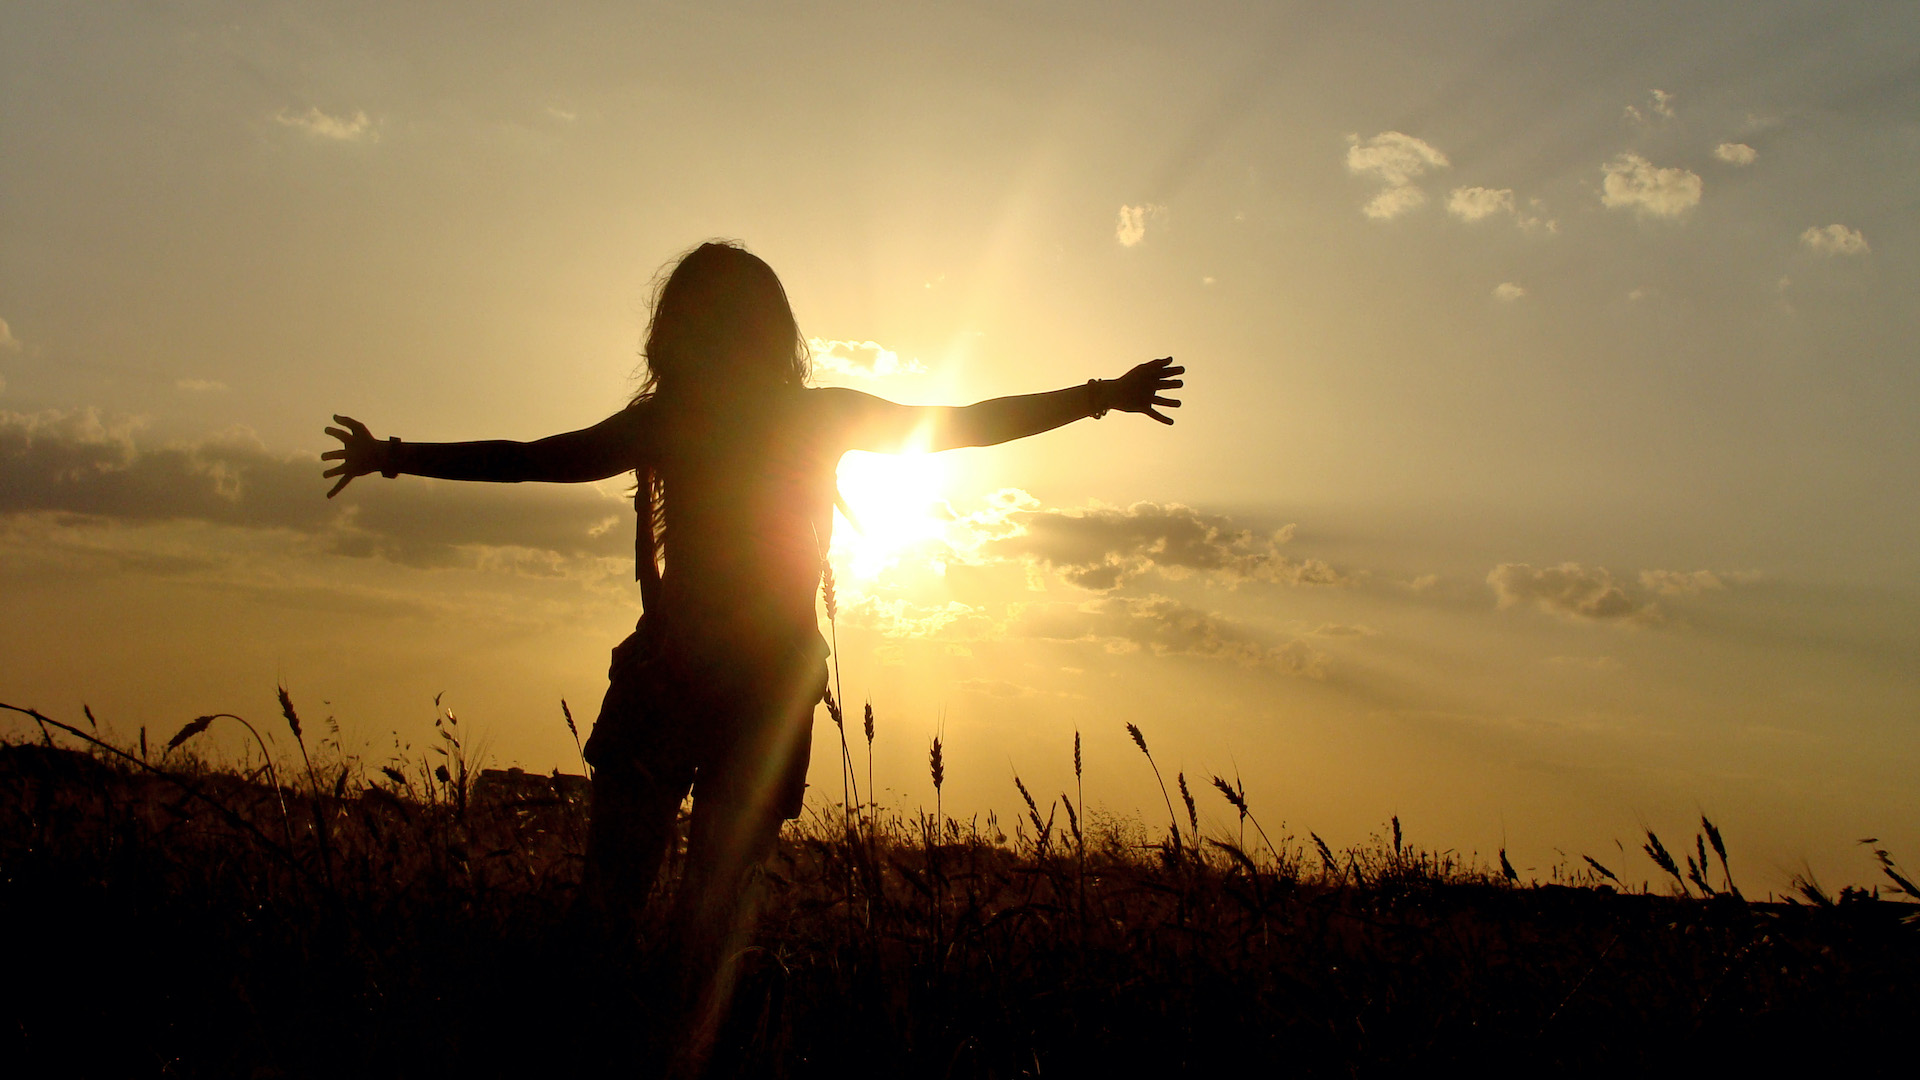 A woman stands in a field of grass, silhouetted by the sun